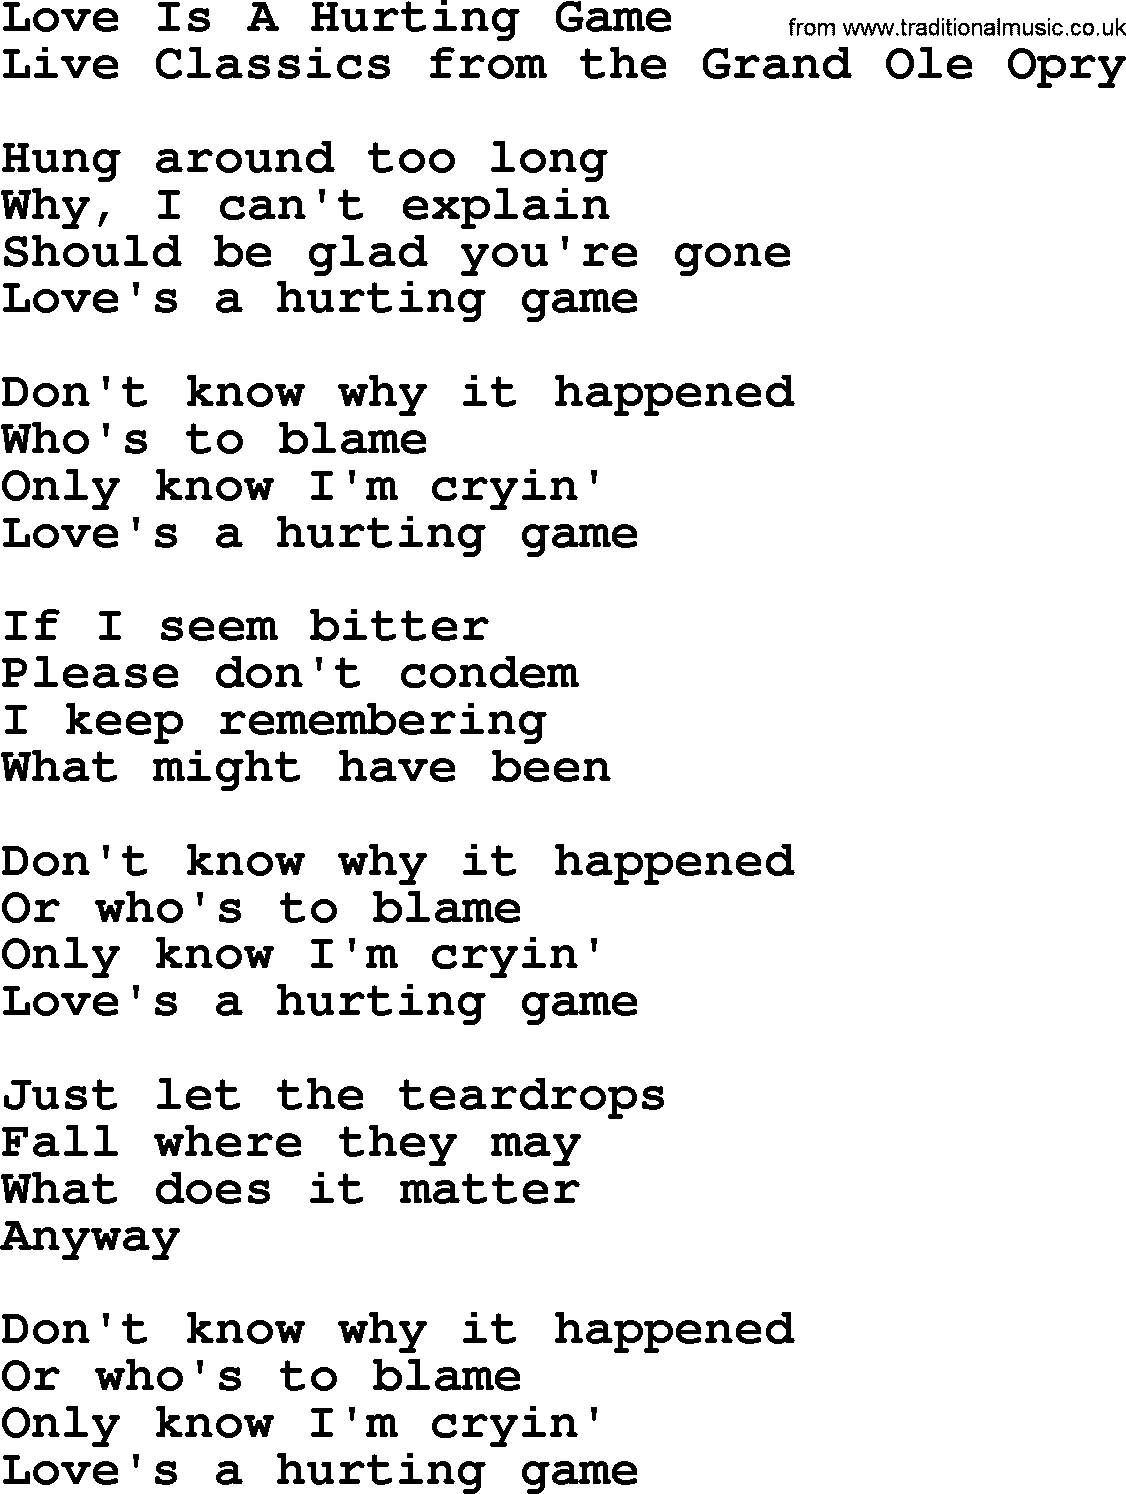 Marty Robbins song: Love Is A Hurting Game, lyrics